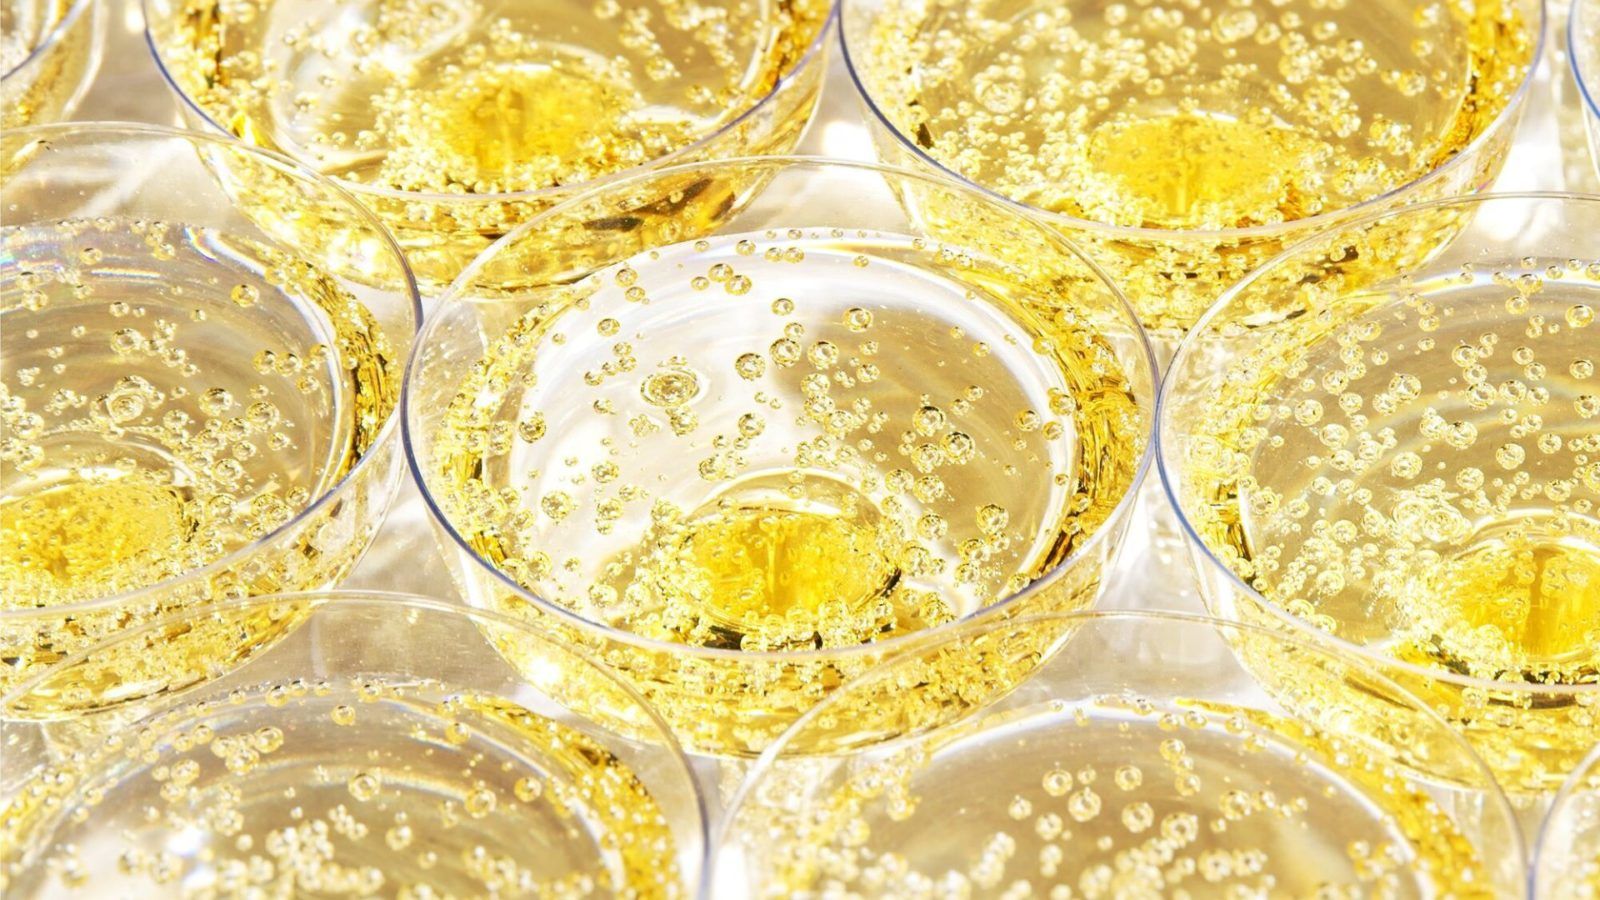 Sparkling wine vs champagne: How are they different?